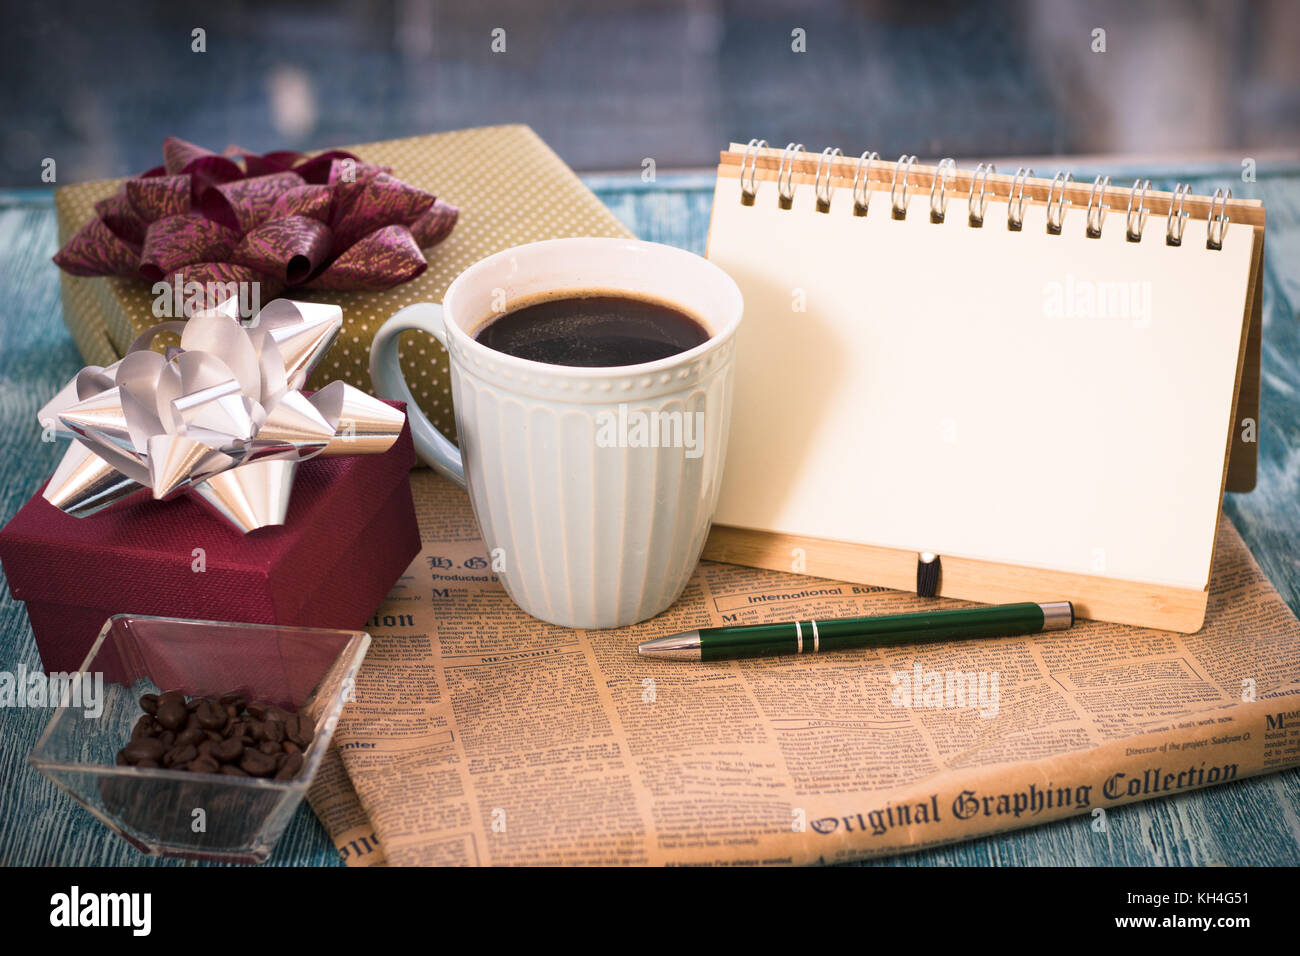 A festive still-life with presents, a cup, a vase, a notebook  Stock Photo